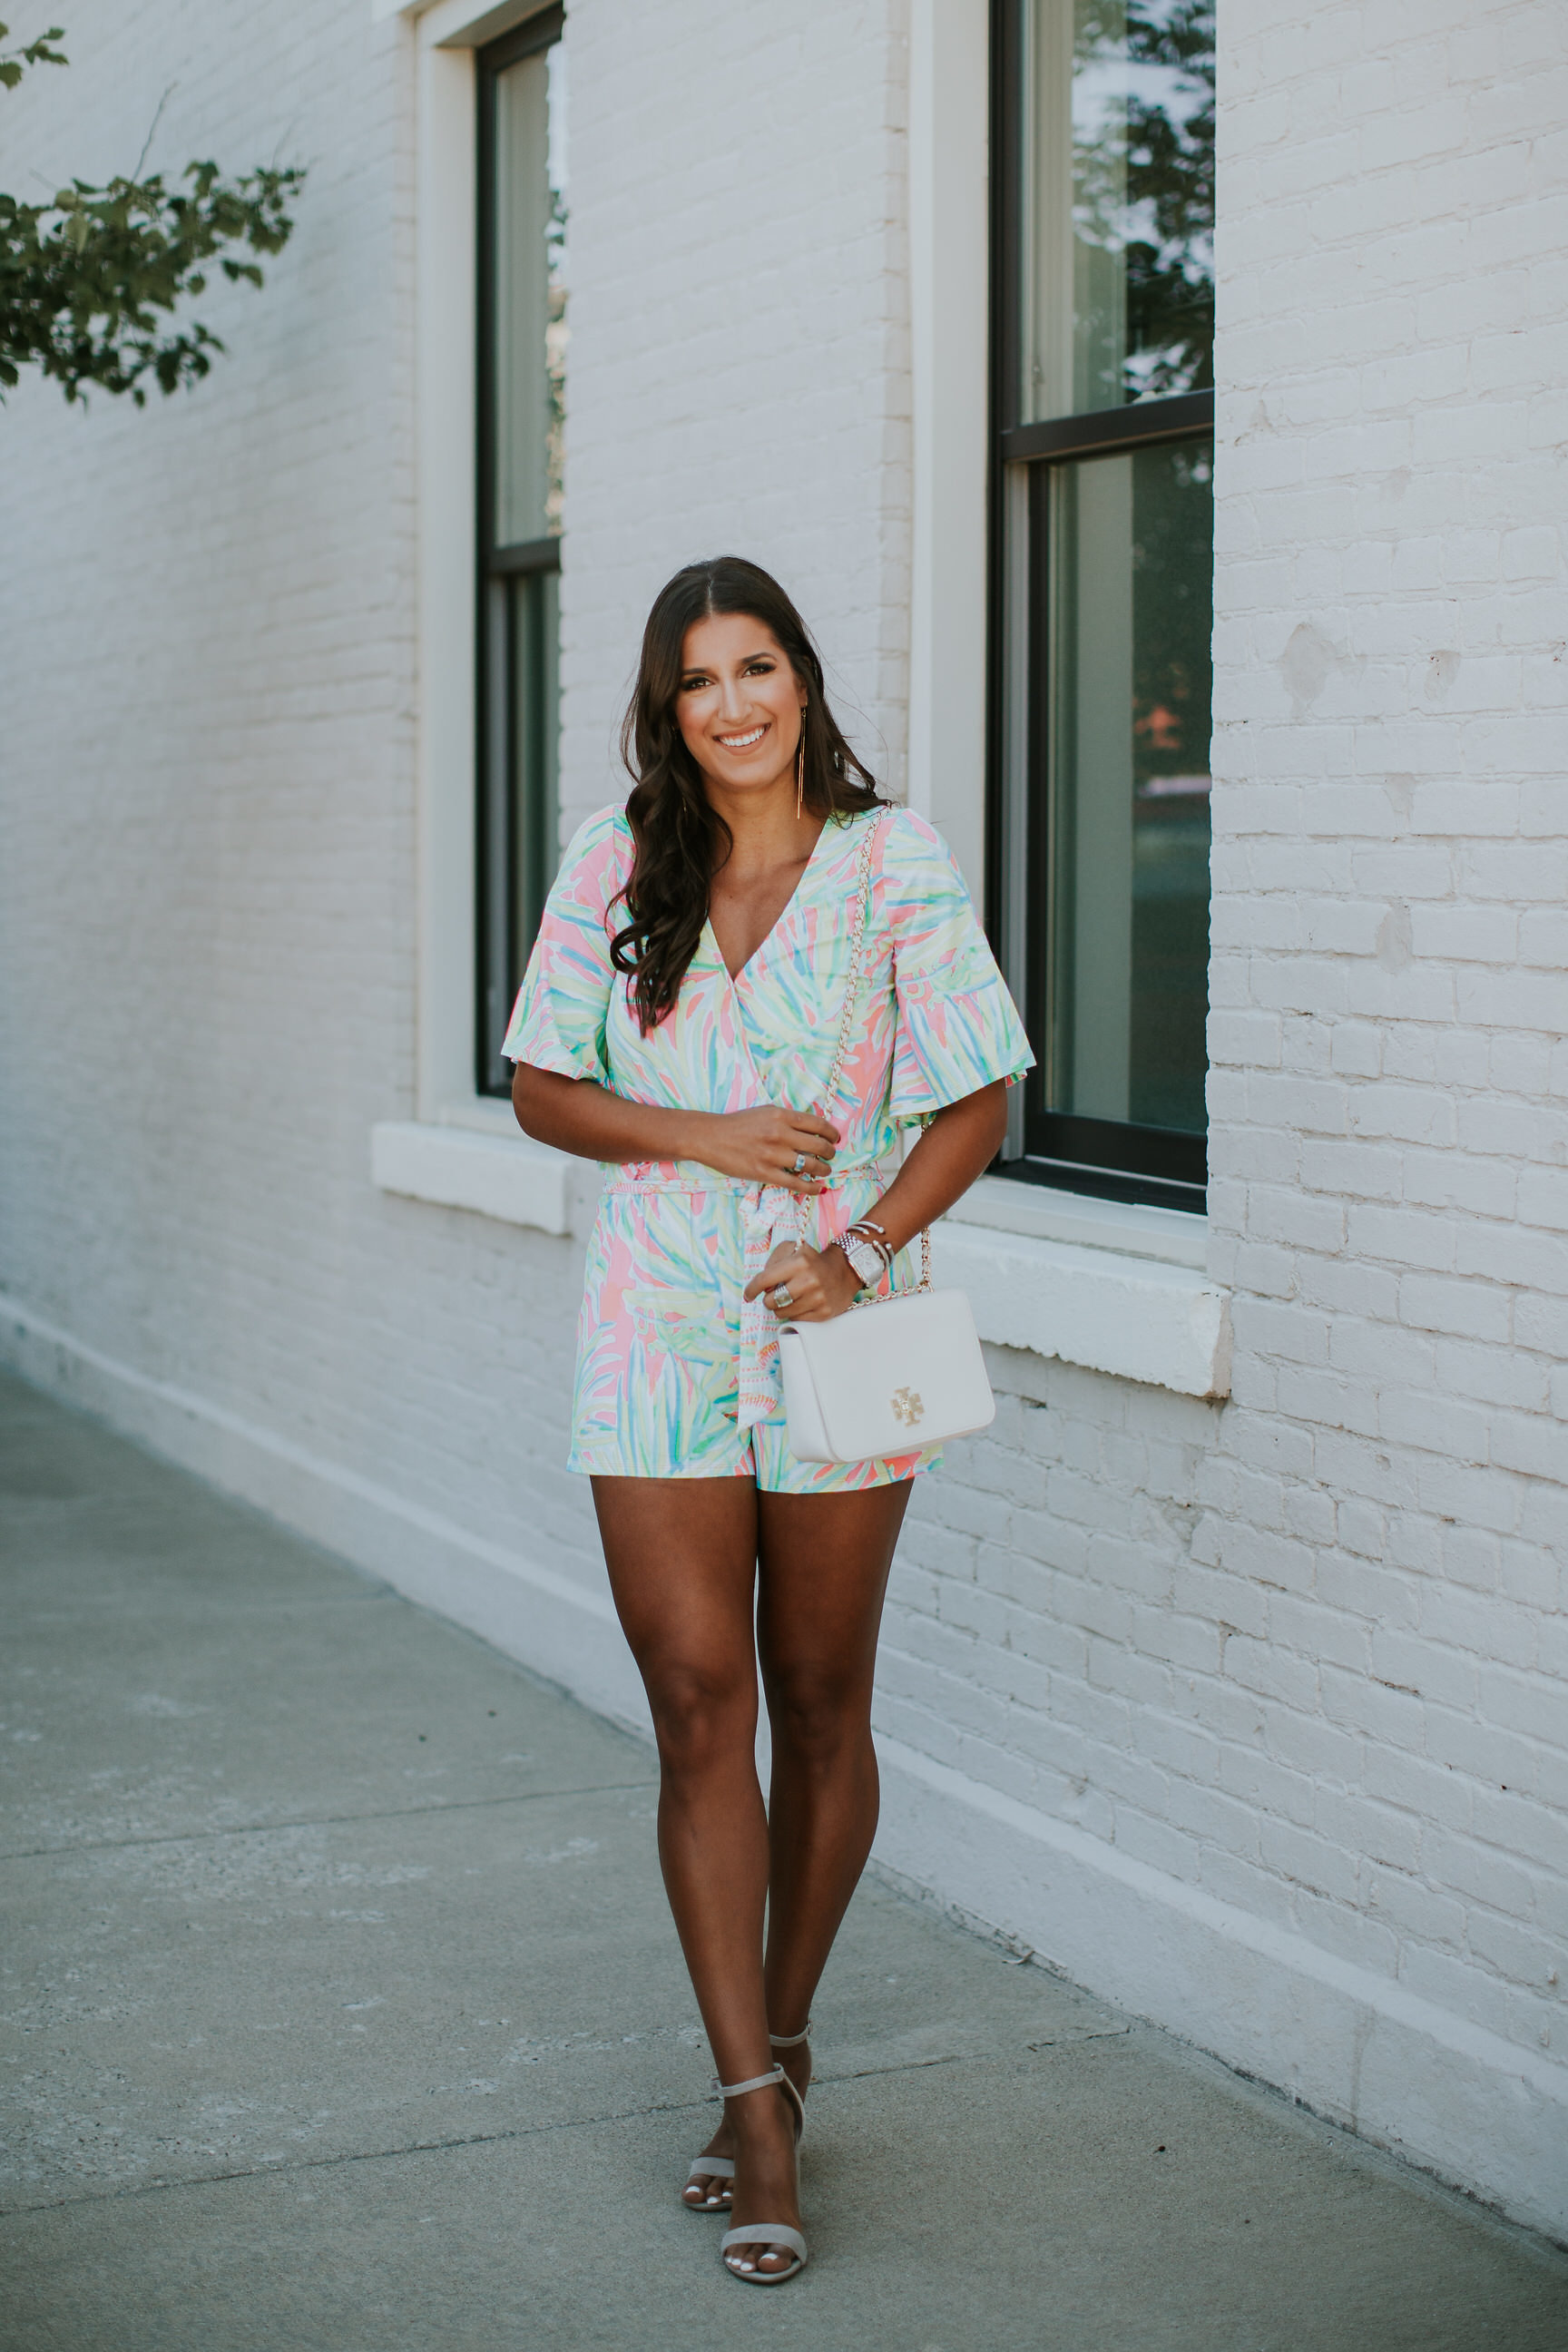 summer print romper, lilly pulitzer romper, lilly pulitzer madilyn romper, tory burch parker chain wallet, summer styles, summer outfit, summertime fashion, summertime prints, lilly pulitzer prints, lilly pulitzer promo, lilly pulitzer sale // grace wainwright a southern drawl